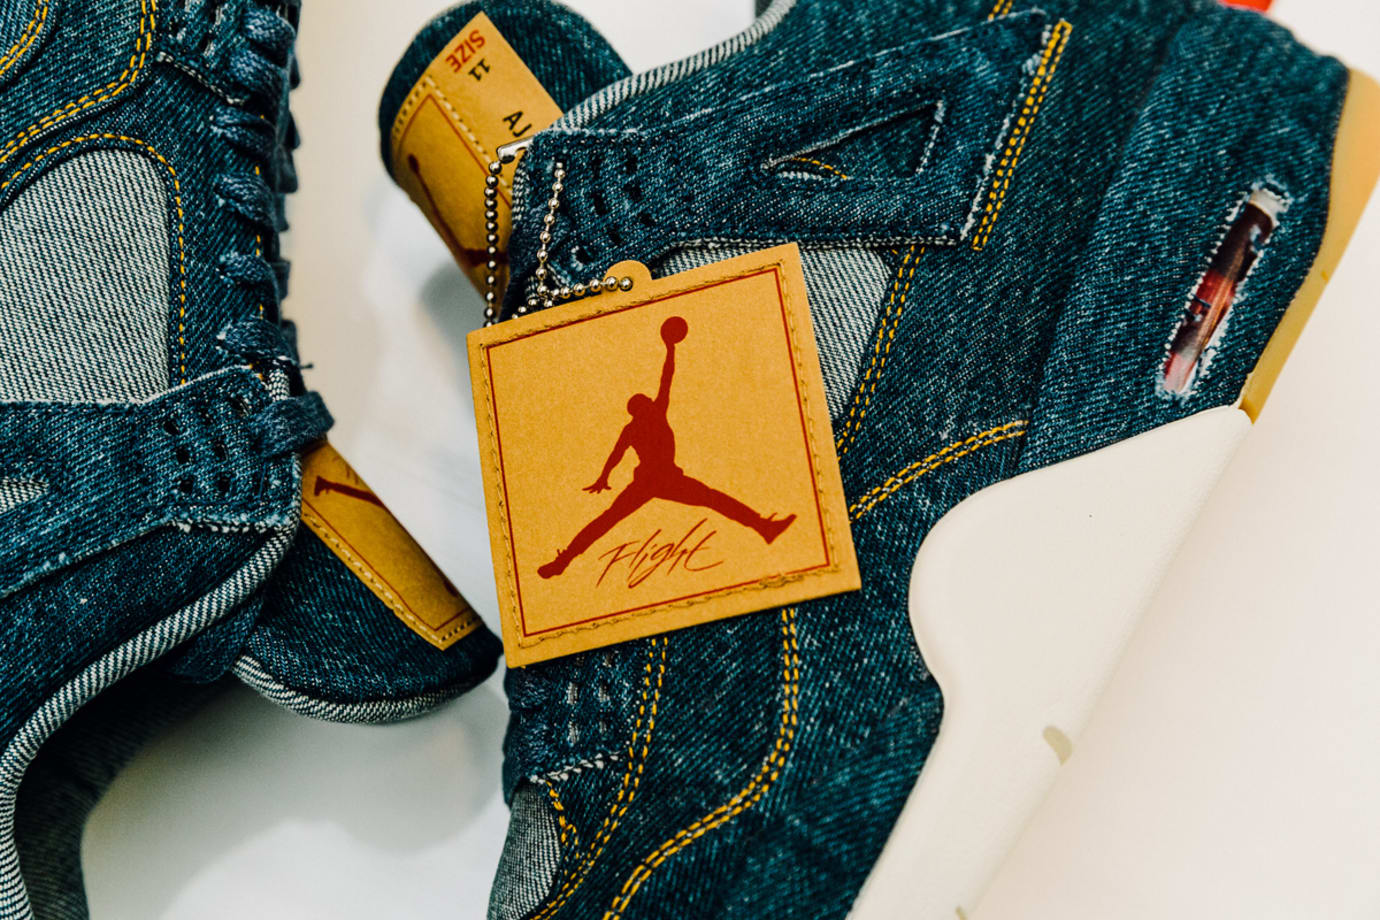 Where to Buy Levis Air Jordan 4 | Sole Collector